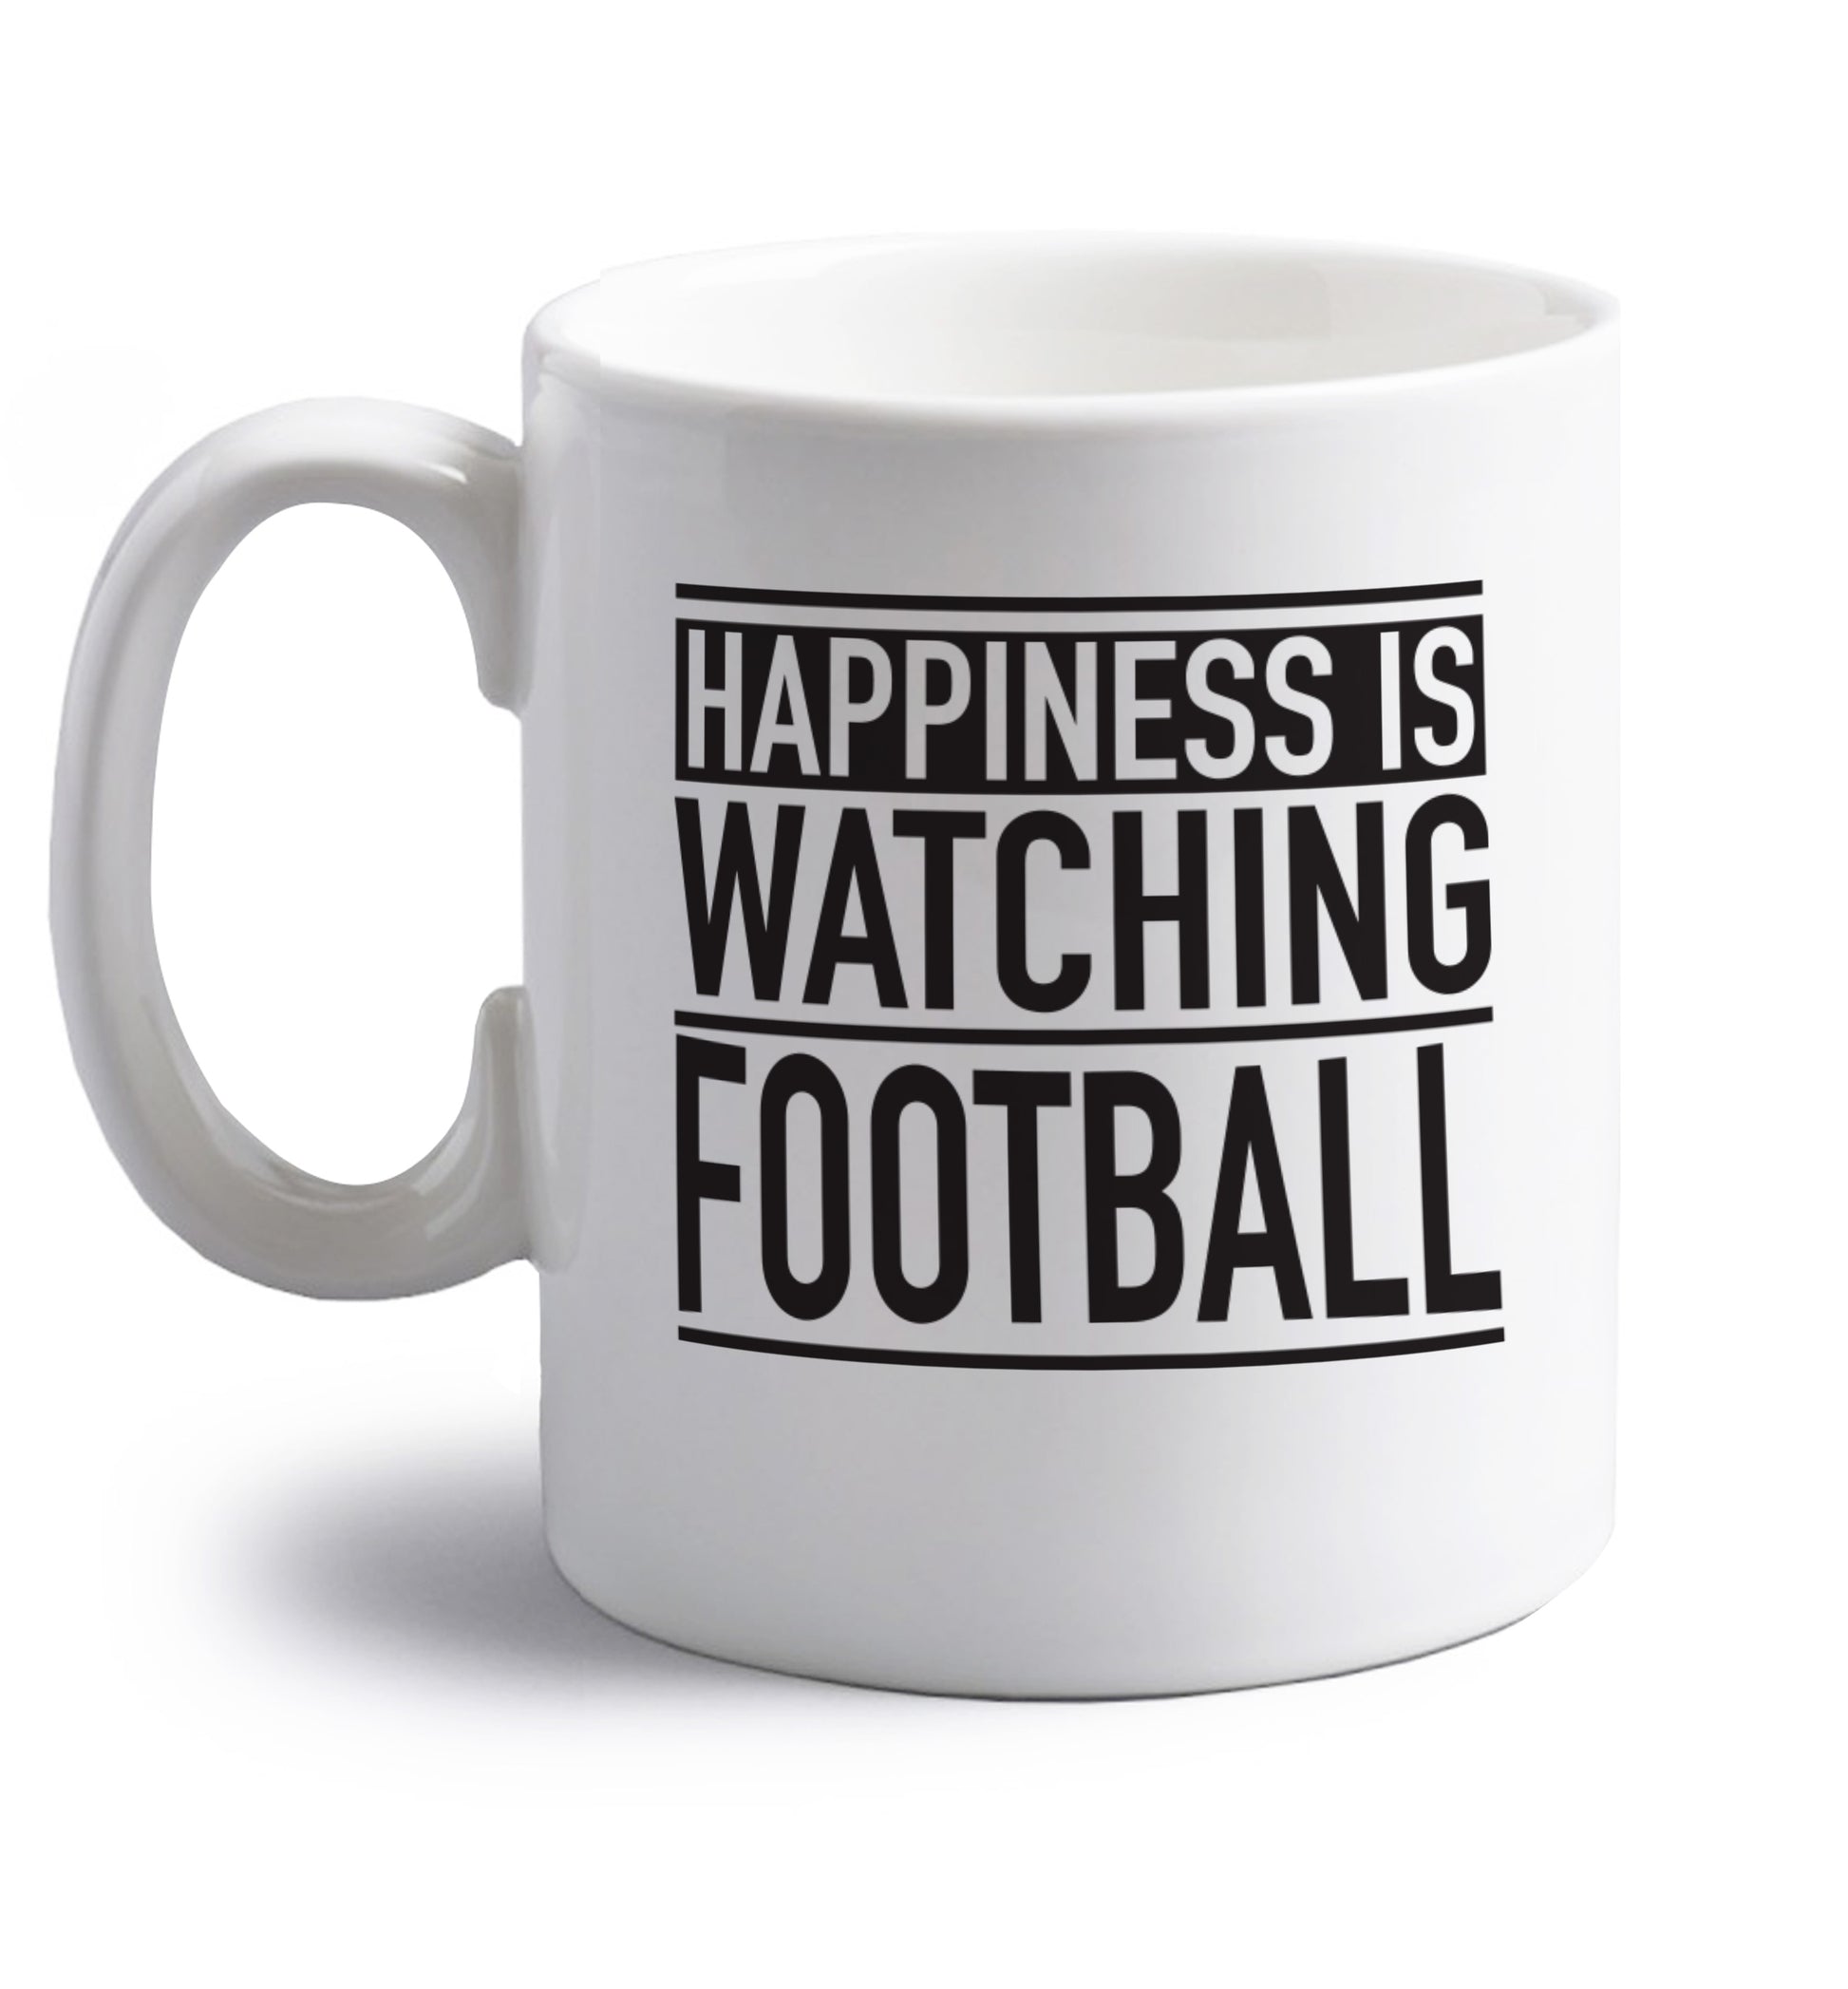 Happiness is watching football right handed white ceramic mug 